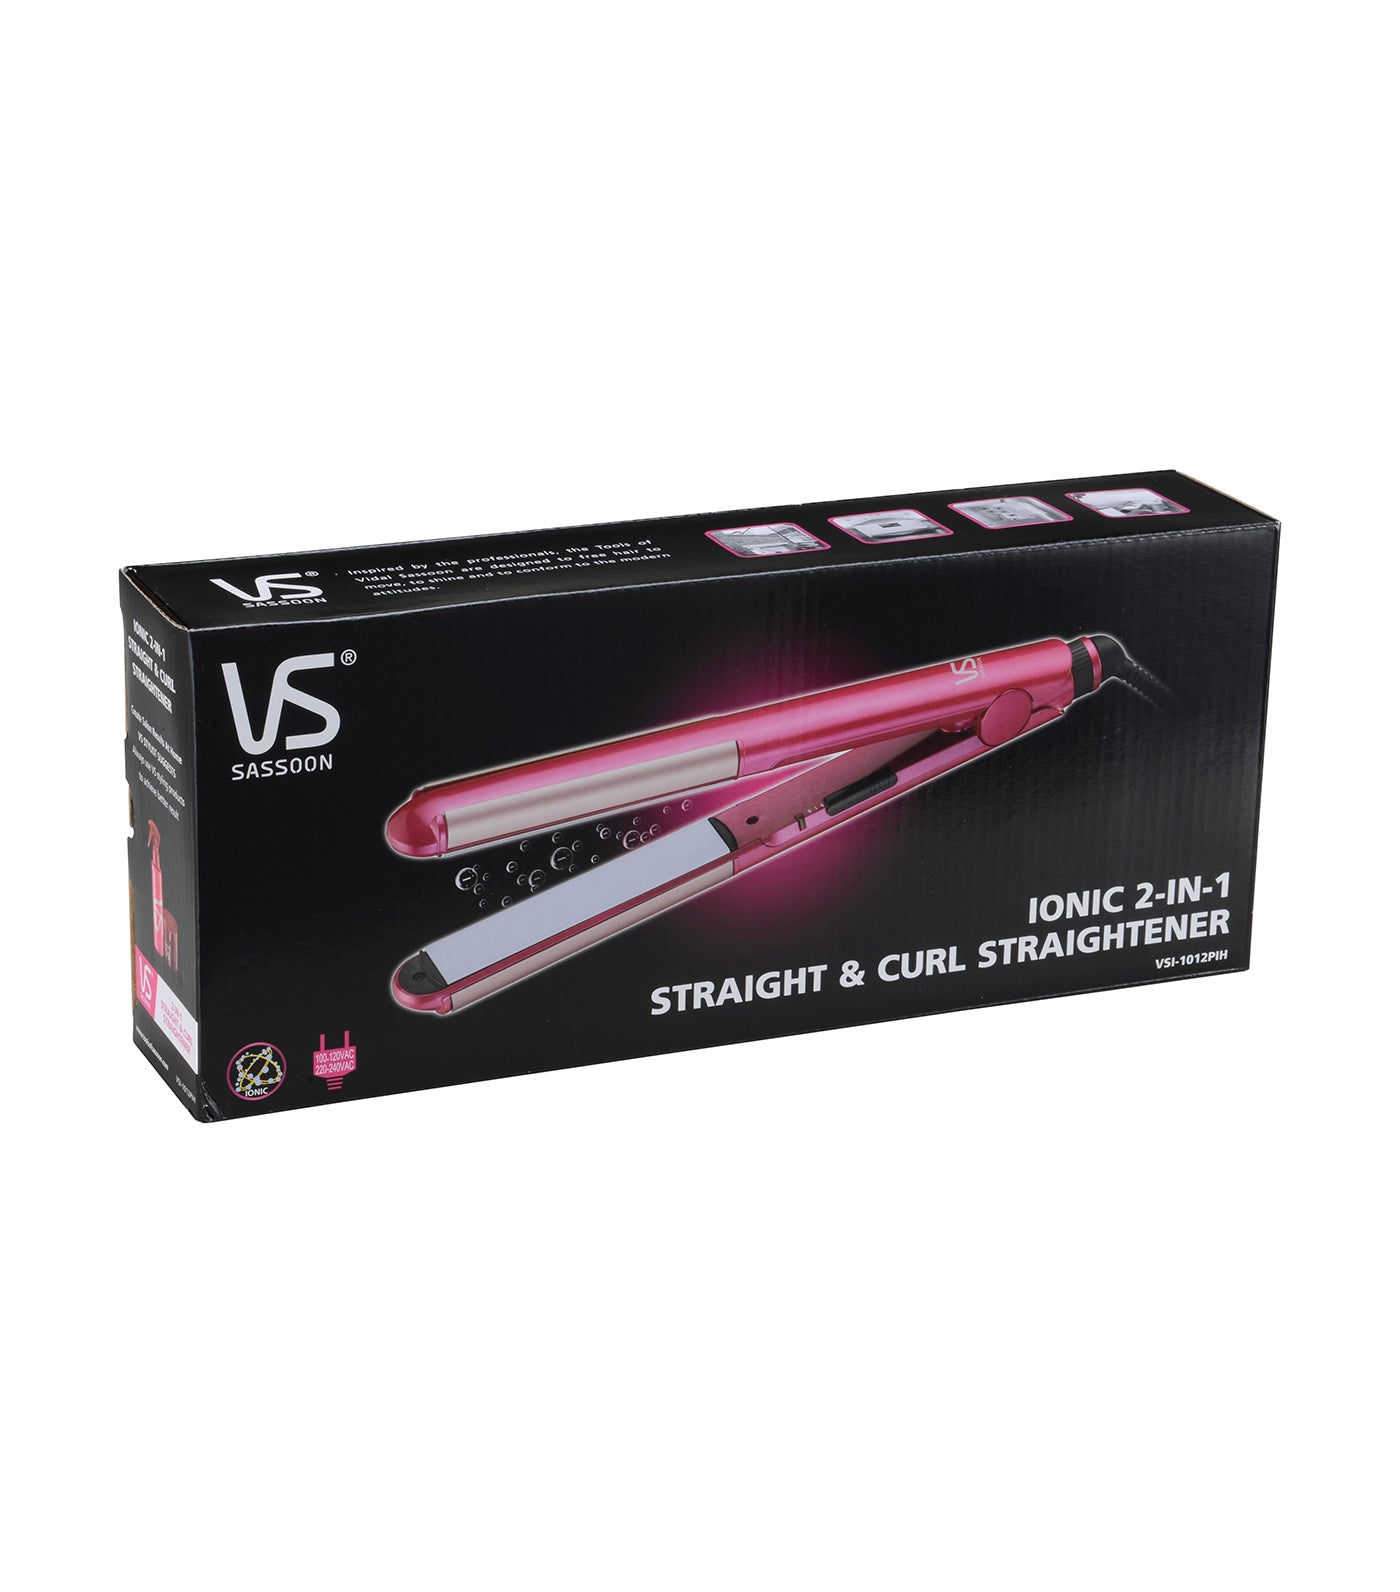 2-in-1 Straight & Curl Styler